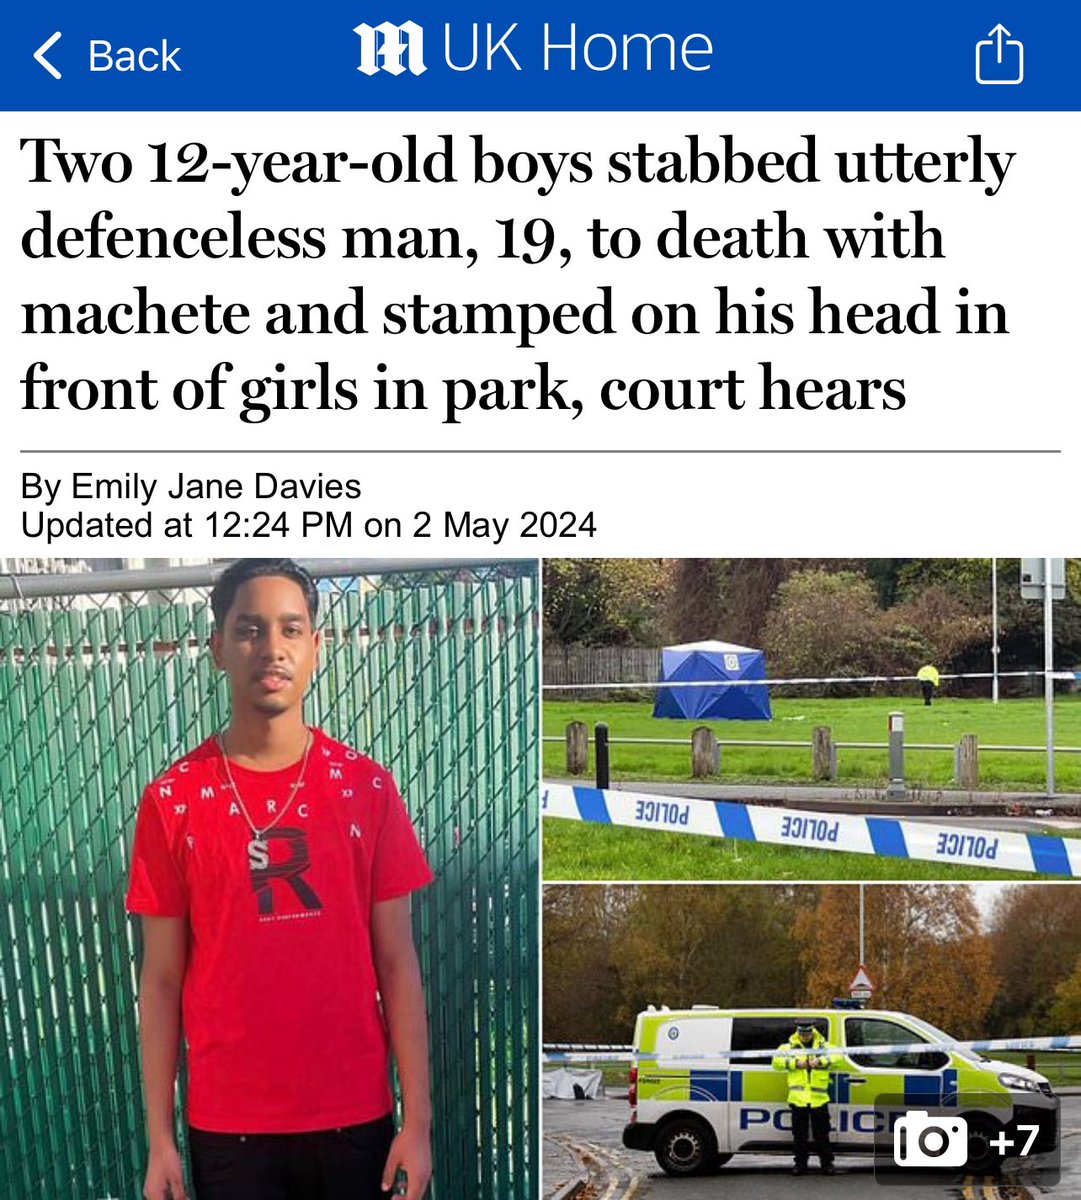 UK - Two 12 year old boys slashed a 19 year old man to death with a machete. Don’t talk to me about youth clubs and outreach! We need sentences that don’t excuse criminals. I don’t care what age they are.